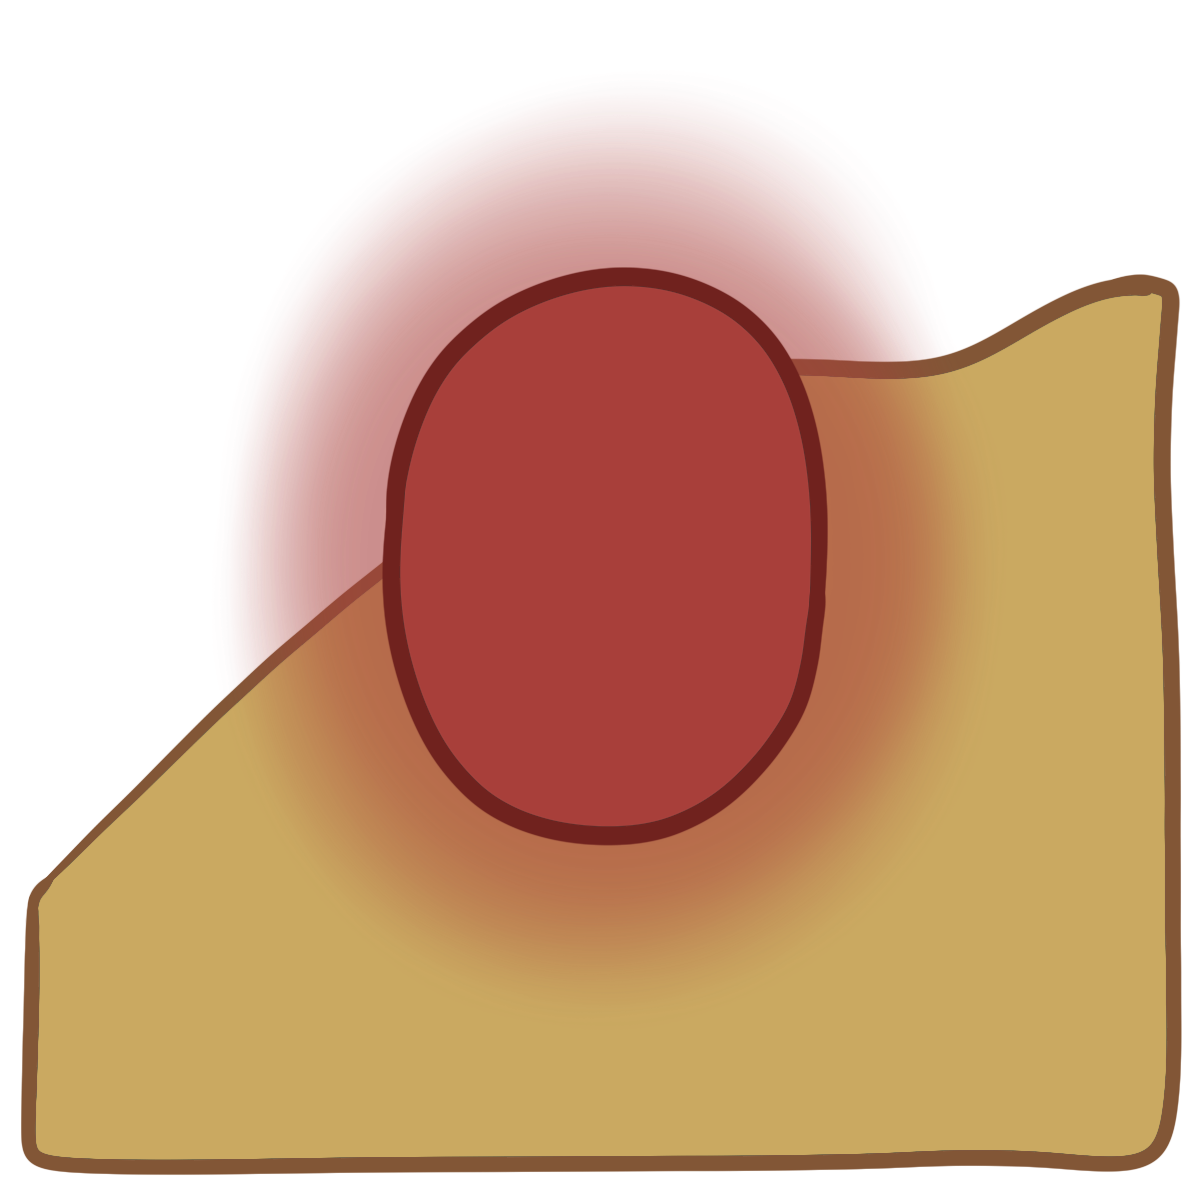 A glowing red oval. Curved yellow skin fills the bottom half of the background.